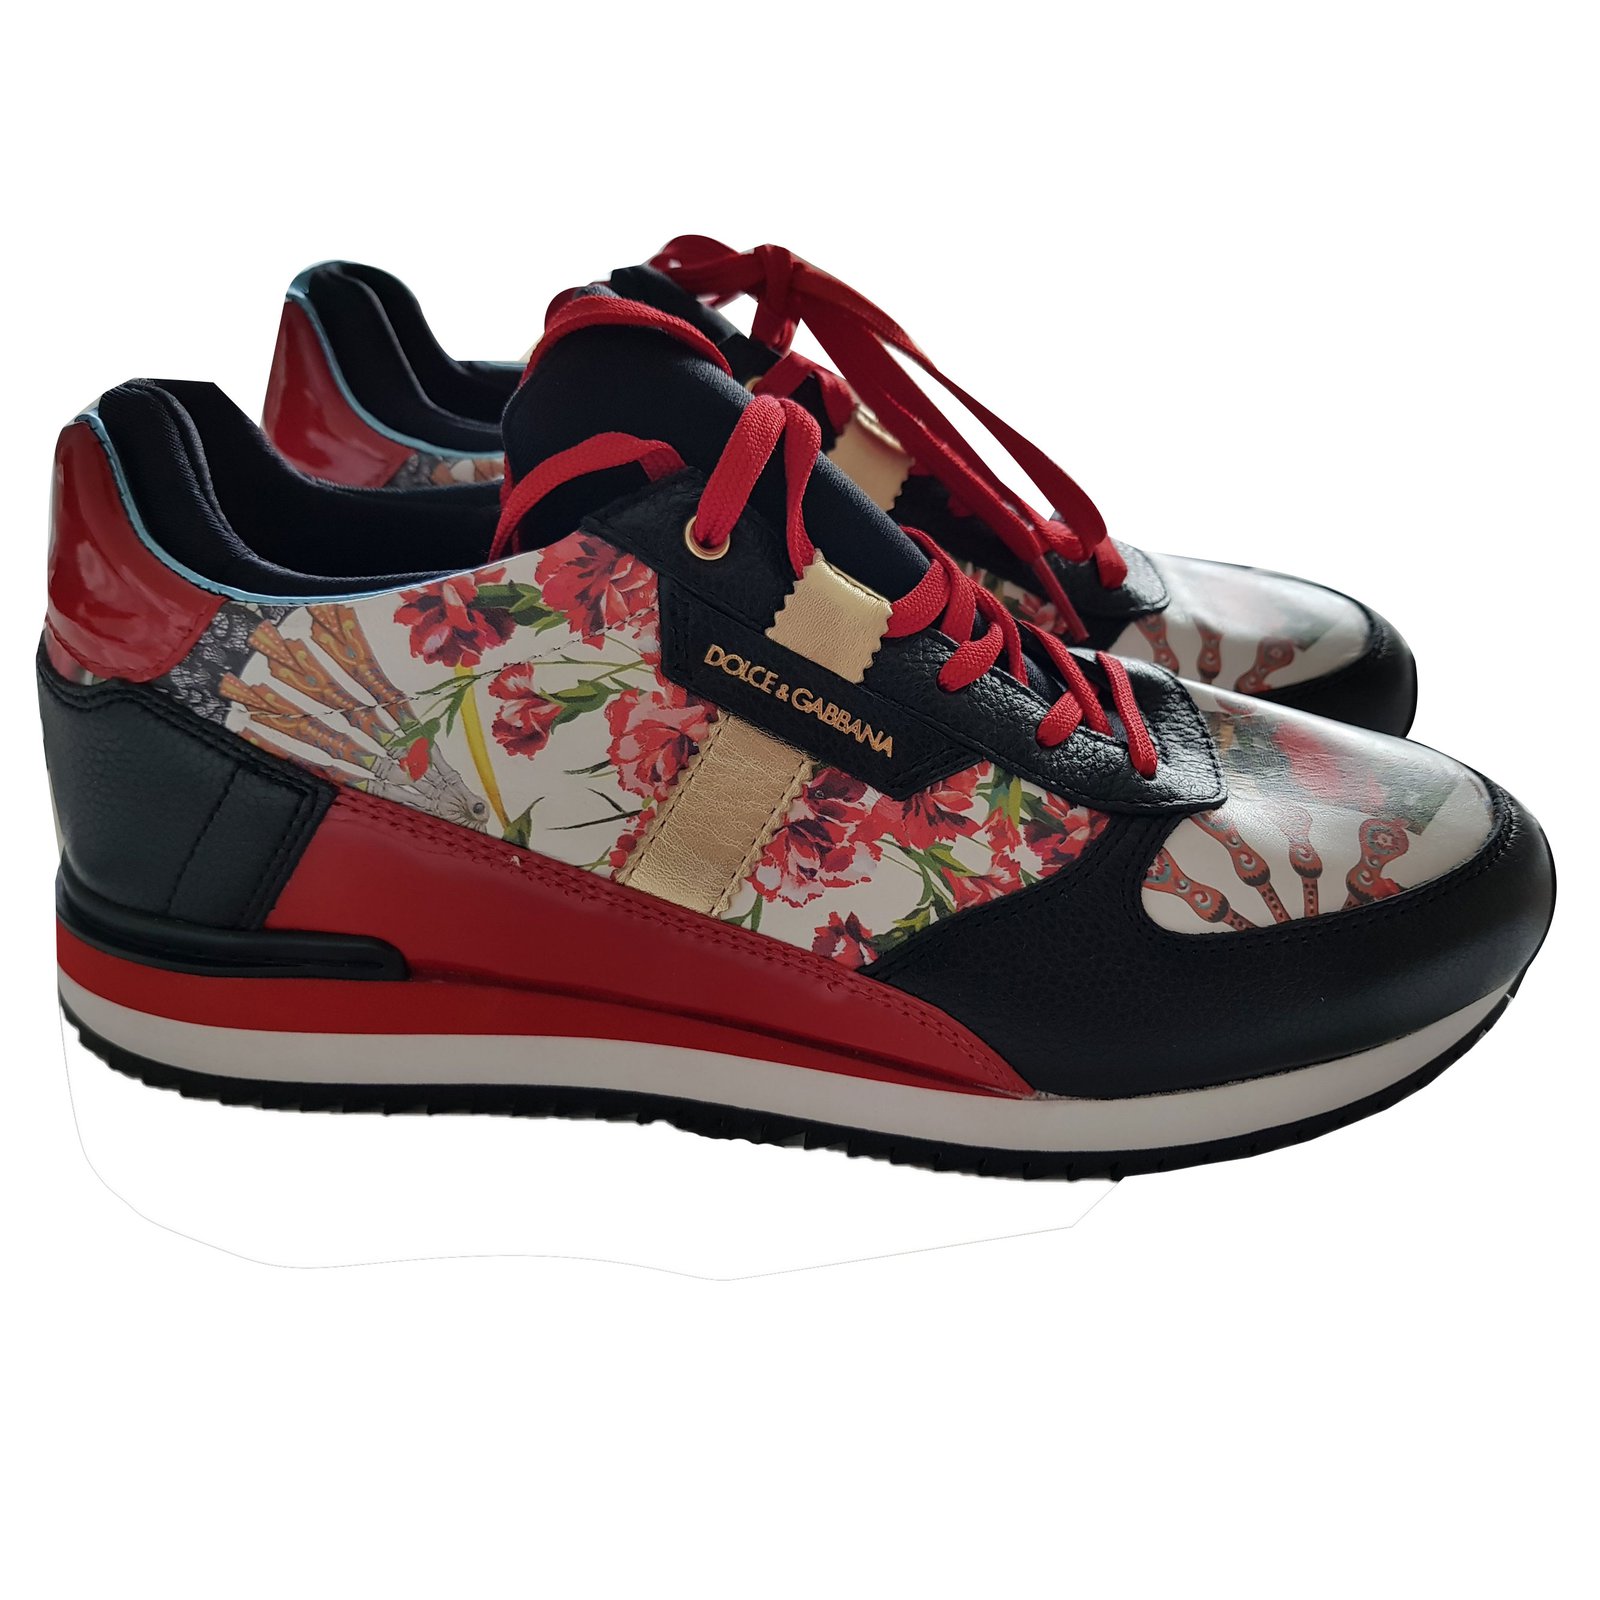 dolce gabbana white red sneakers